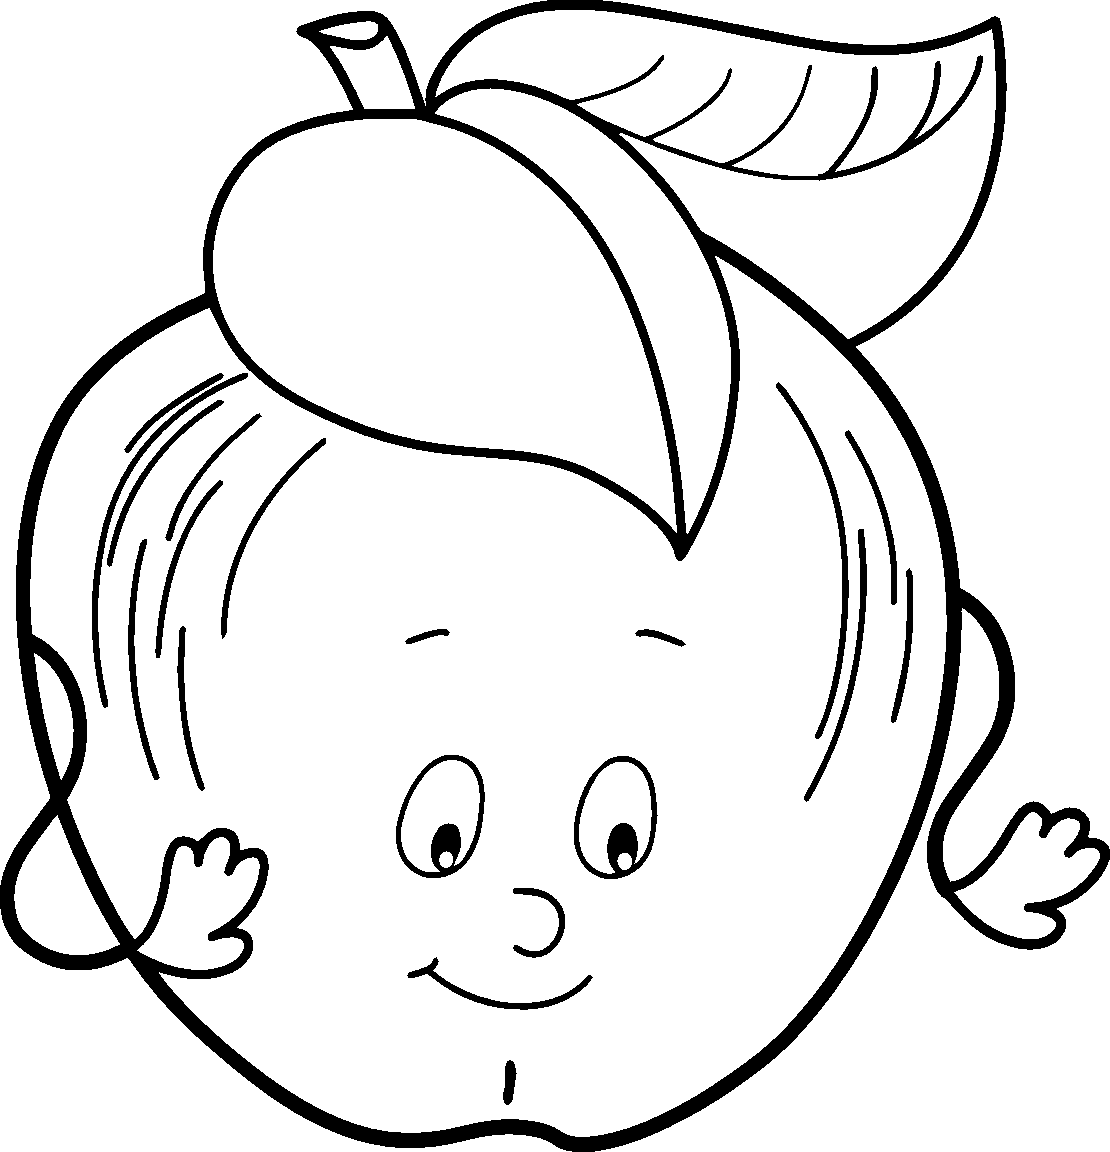 Free Coloring Pages For Kids: Coloring Fruits and Vegetables (part 6)